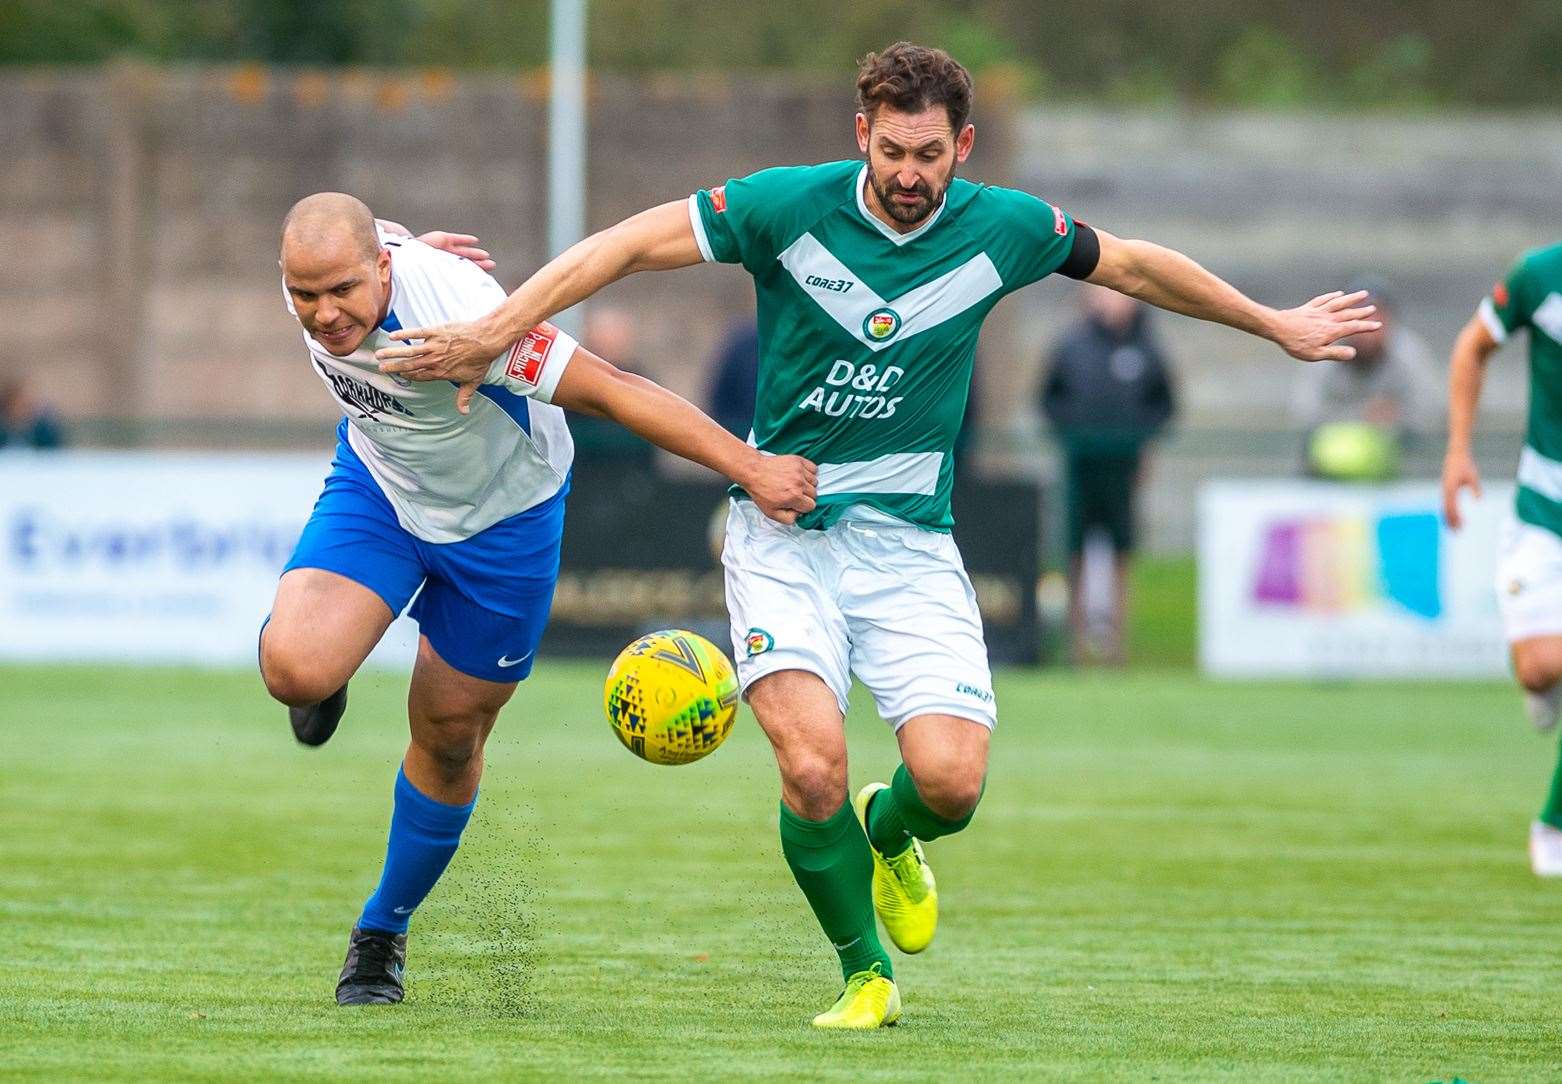 Jay May brushes off Tom Wynter in Ashford's 4-0 win over Hythe Picture: Ian Scammell